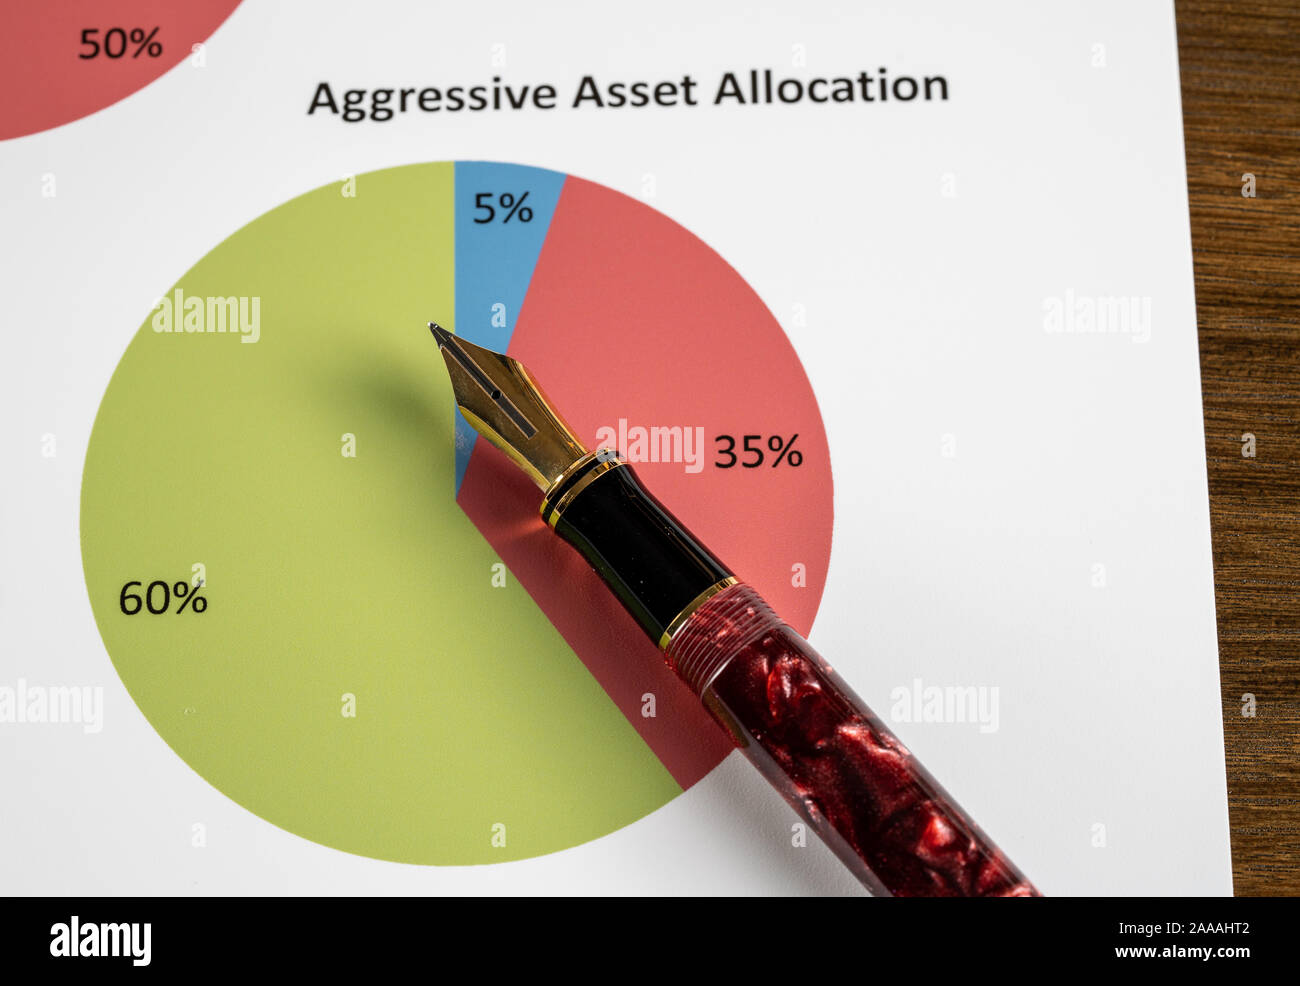 Expensive gold fountain pen pointing to aggressive asset allocation pie chart on desk Stock Photo